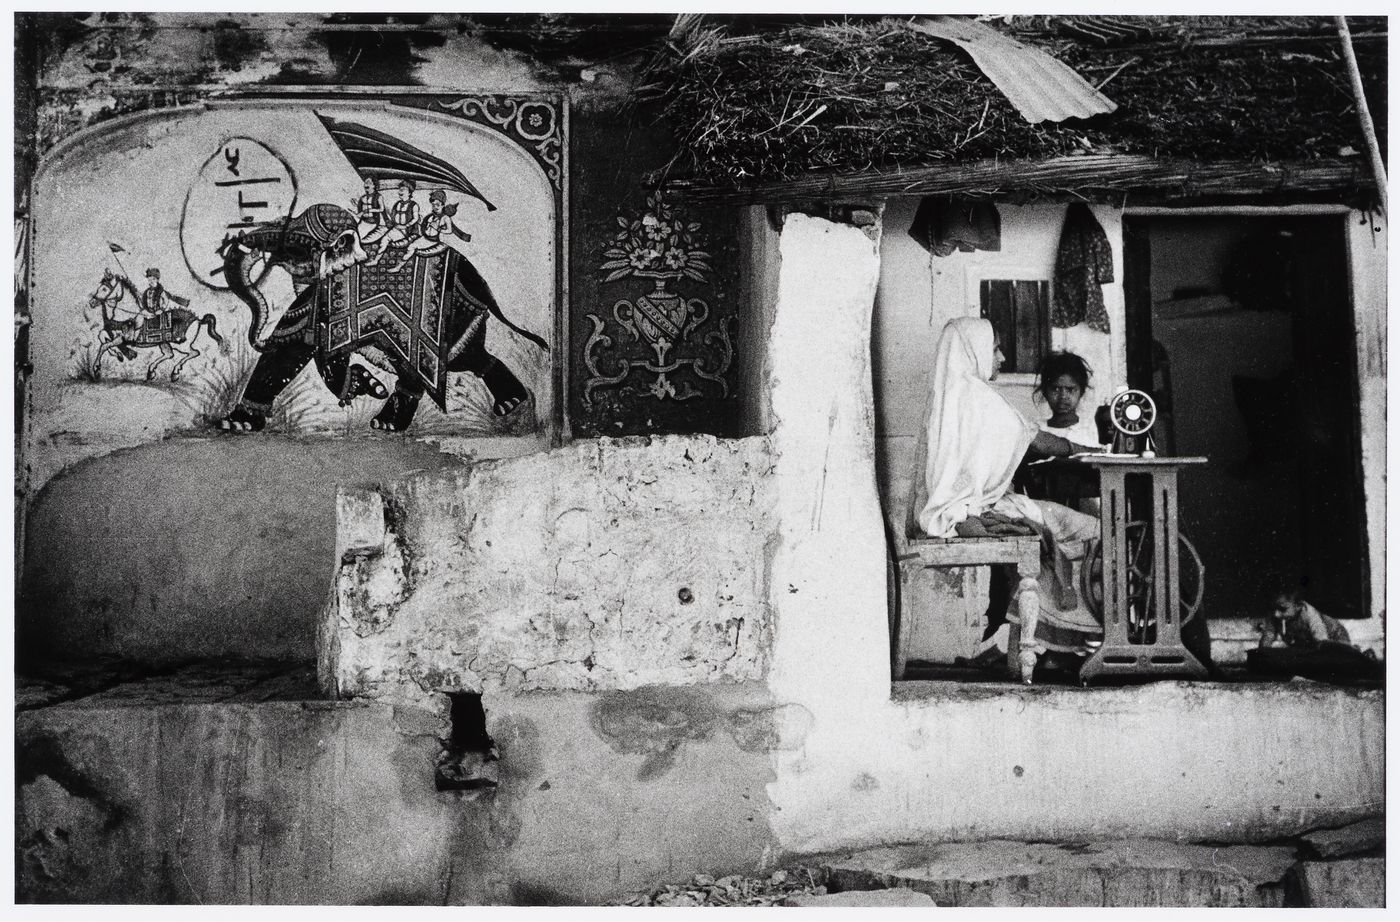 Partial view of a façade of an unidentified building showing a mural and a woman sewing, Jaipur, India